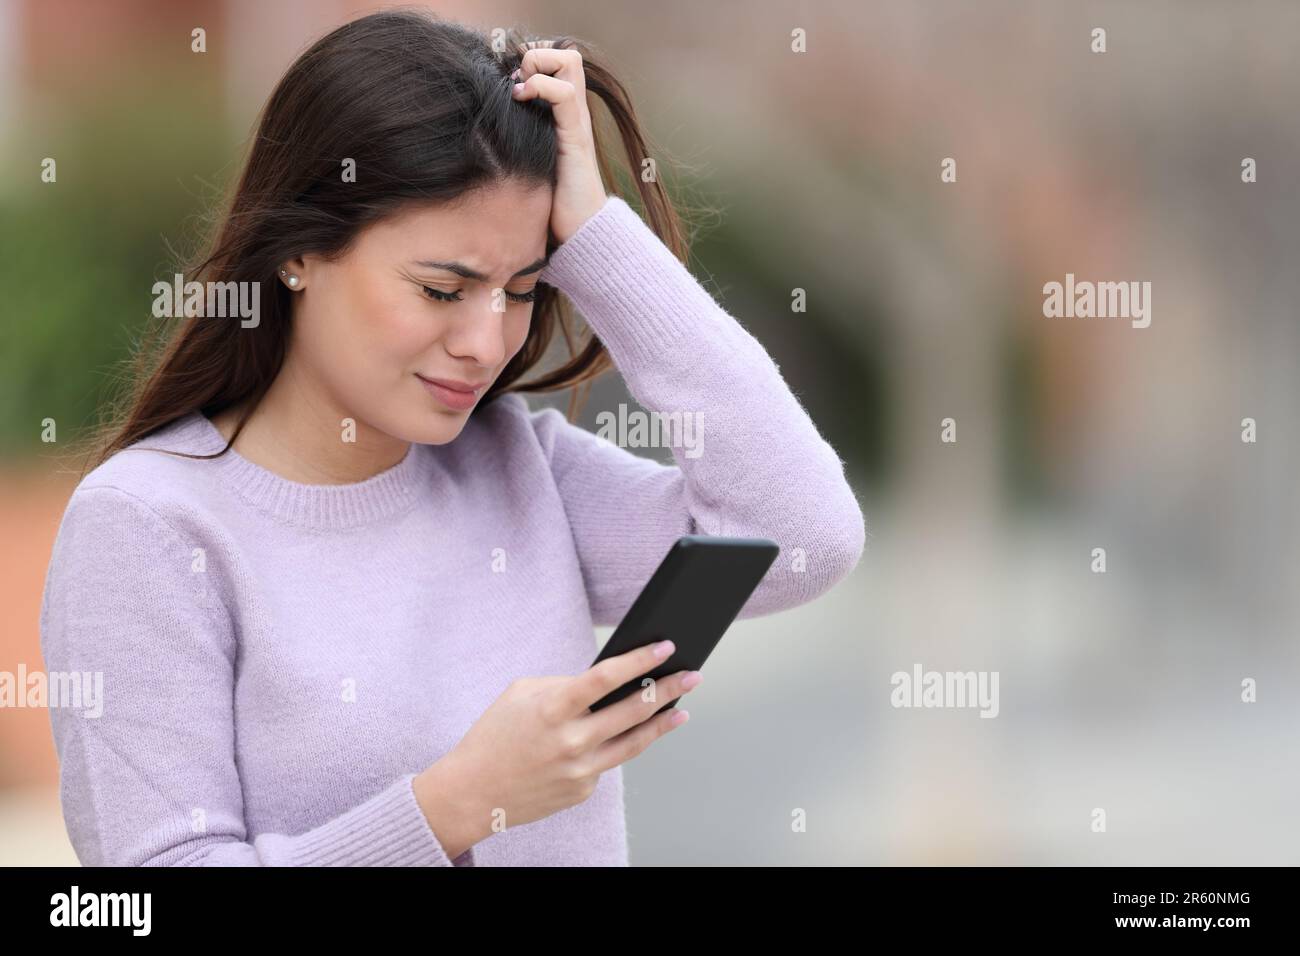 Sad teen complaining reading smart phone text standing in the street Stock Photo